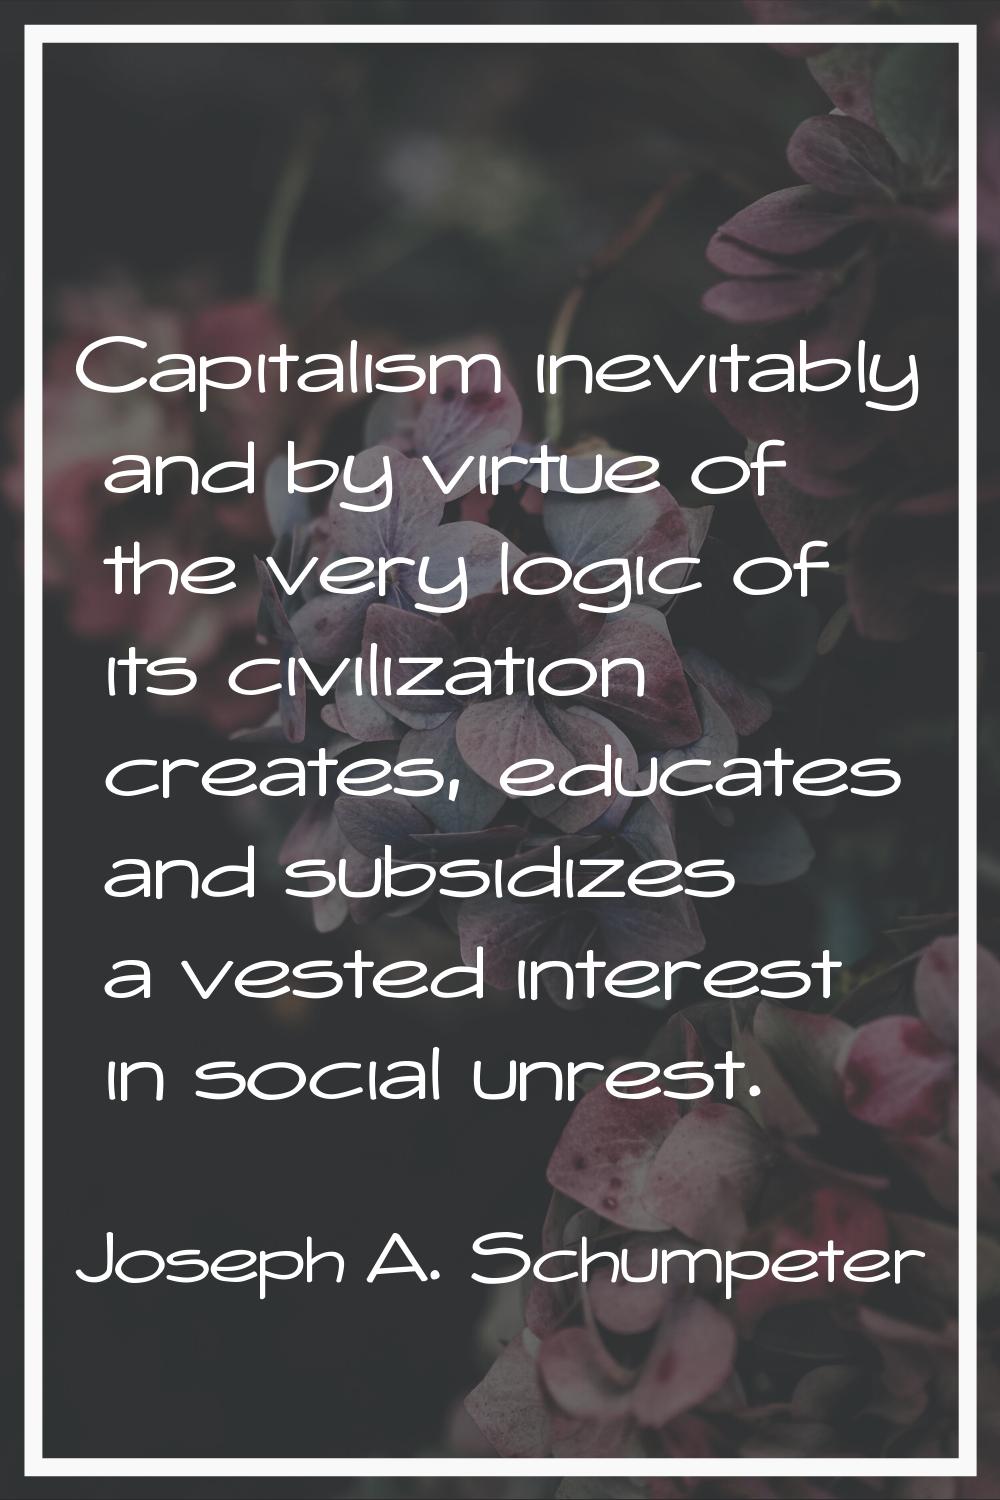 Capitalism inevitably and by virtue of the very logic of its civilization creates, educates and sub